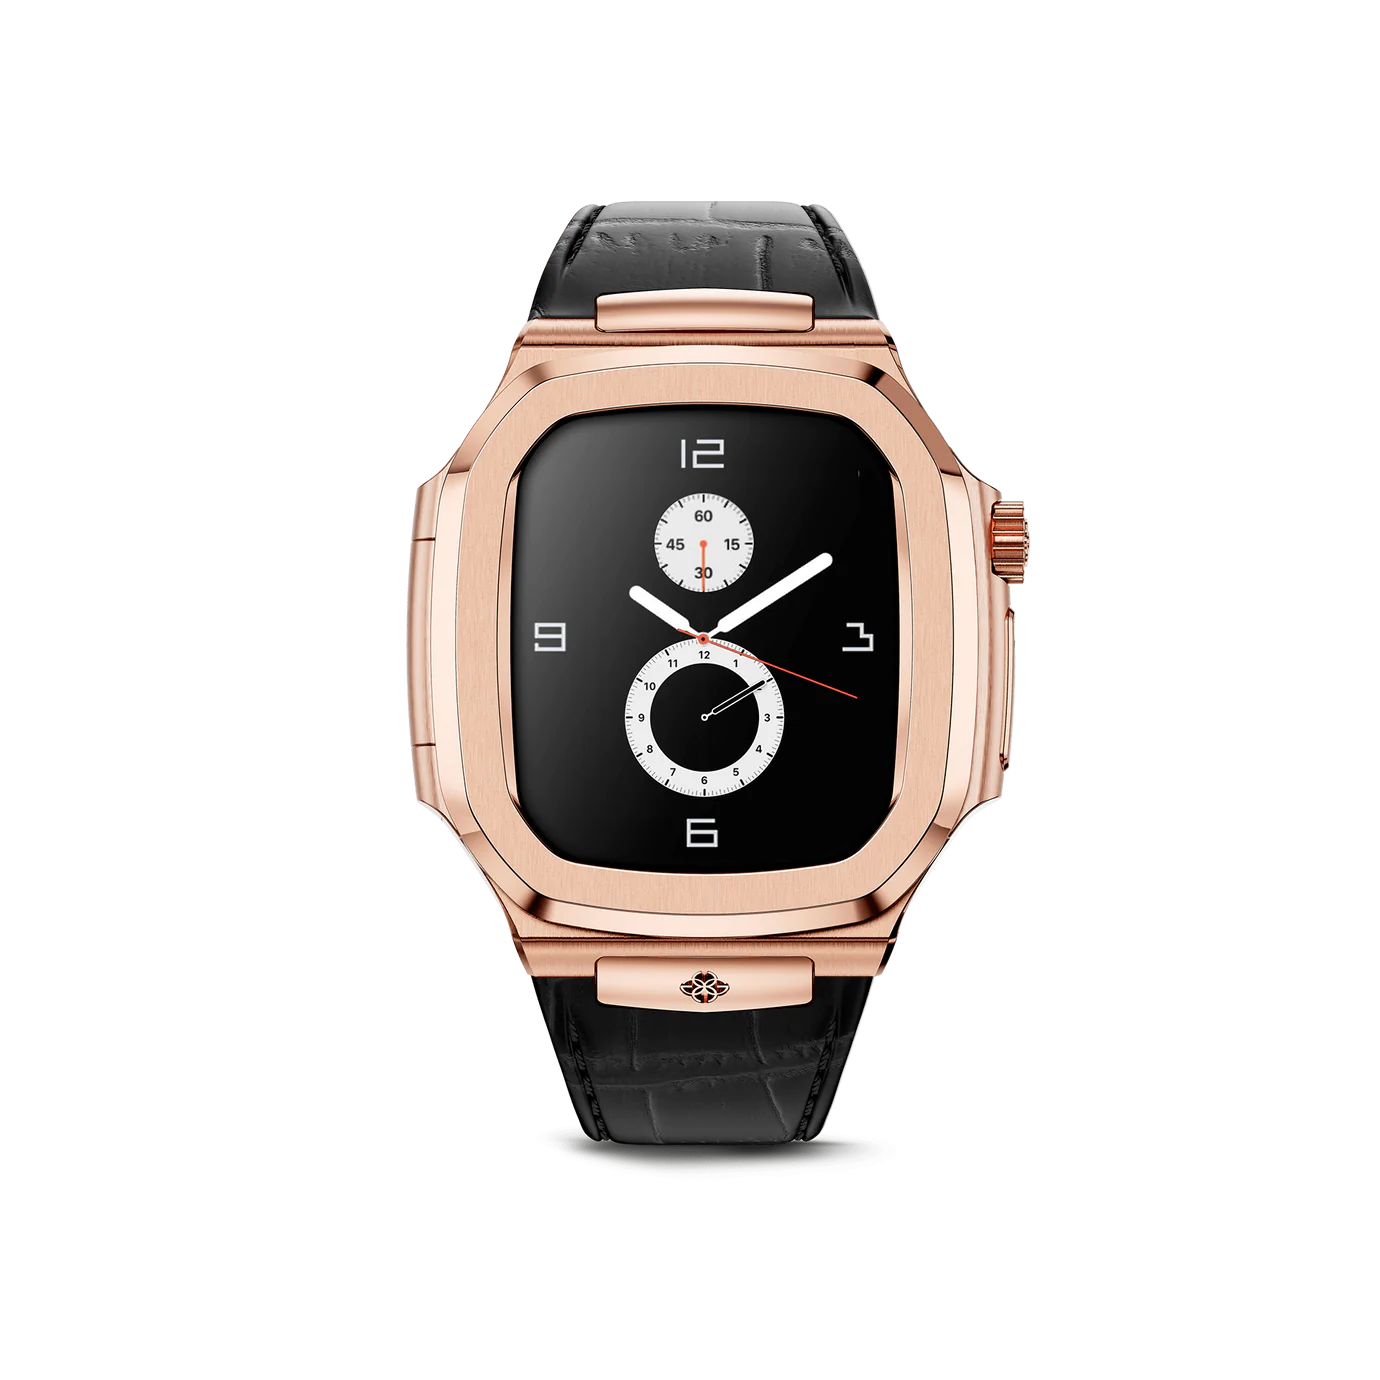 Golden Concept: Luxury Apple Watch Case Royal Edition | Wake Concept Store